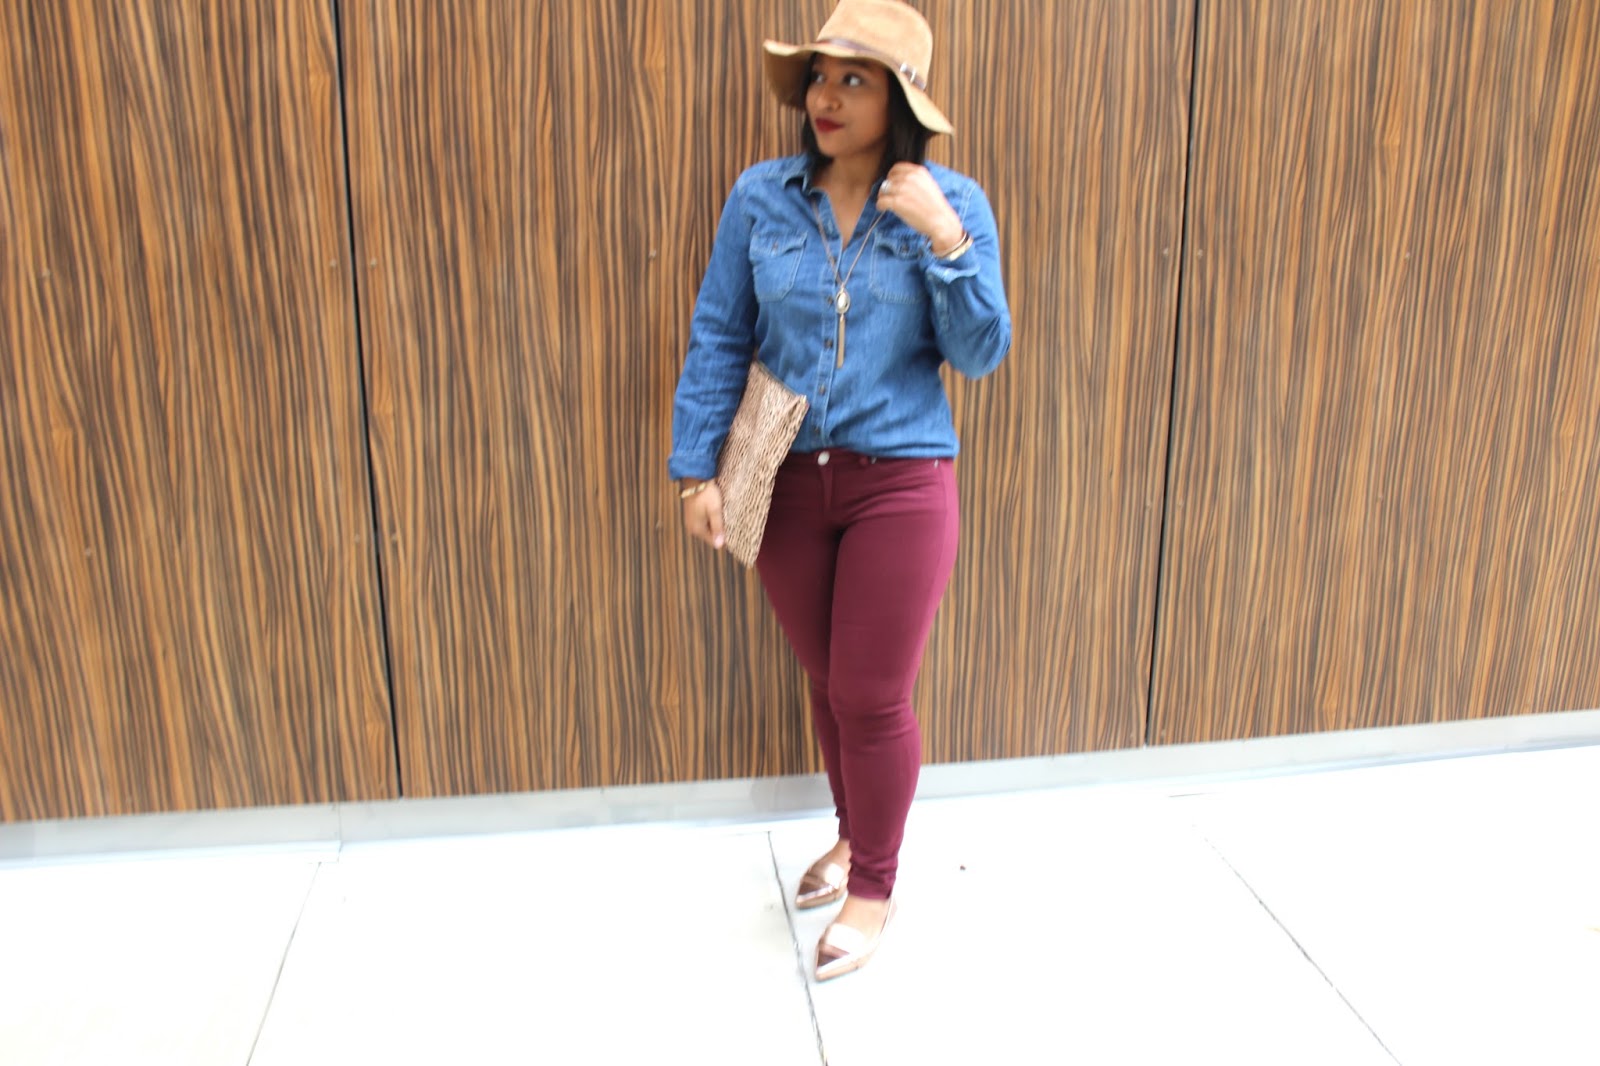 Mandee, hats, fall outfits, denim, forever21, flats, winter hat, fashion blogger, burgundy